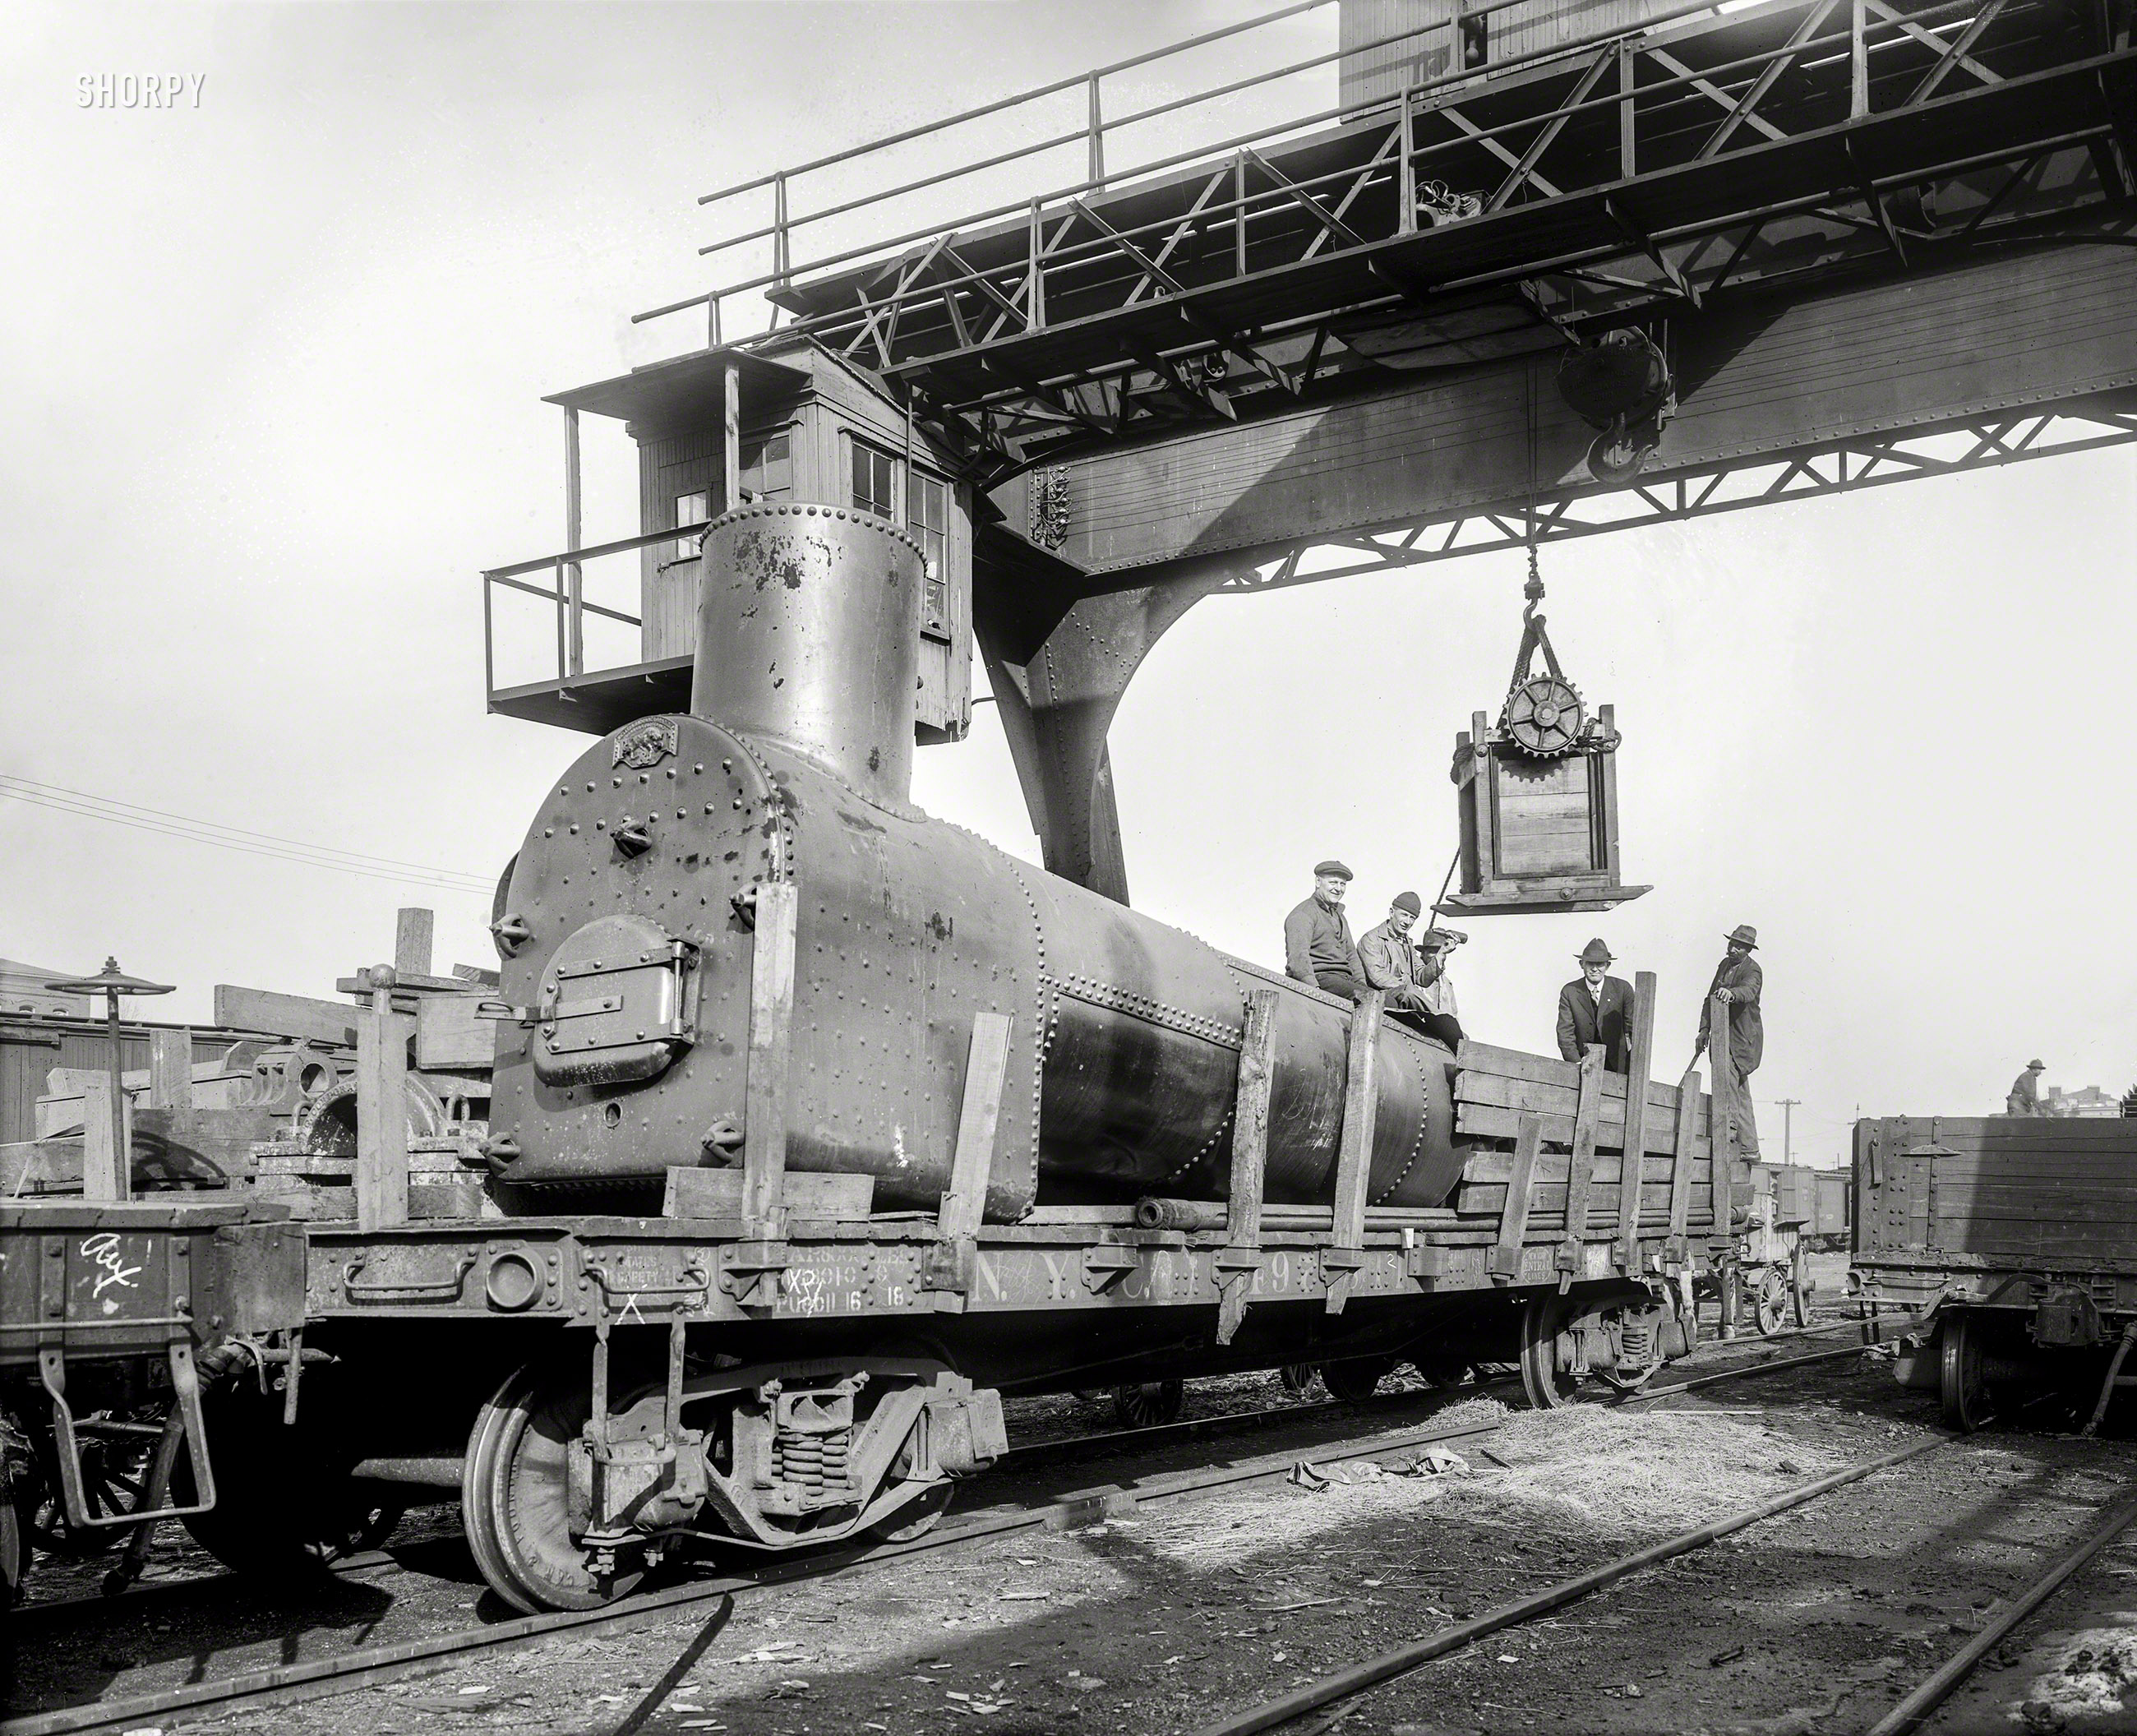 Washington, D.C., circa 1920. "Washington Times -- Oil Co." is all it says on this glass negative showing a rusty coal-fired boiler, a crate on skids and a guy holding a beer bottle. National Photo Company Collection. View full size.